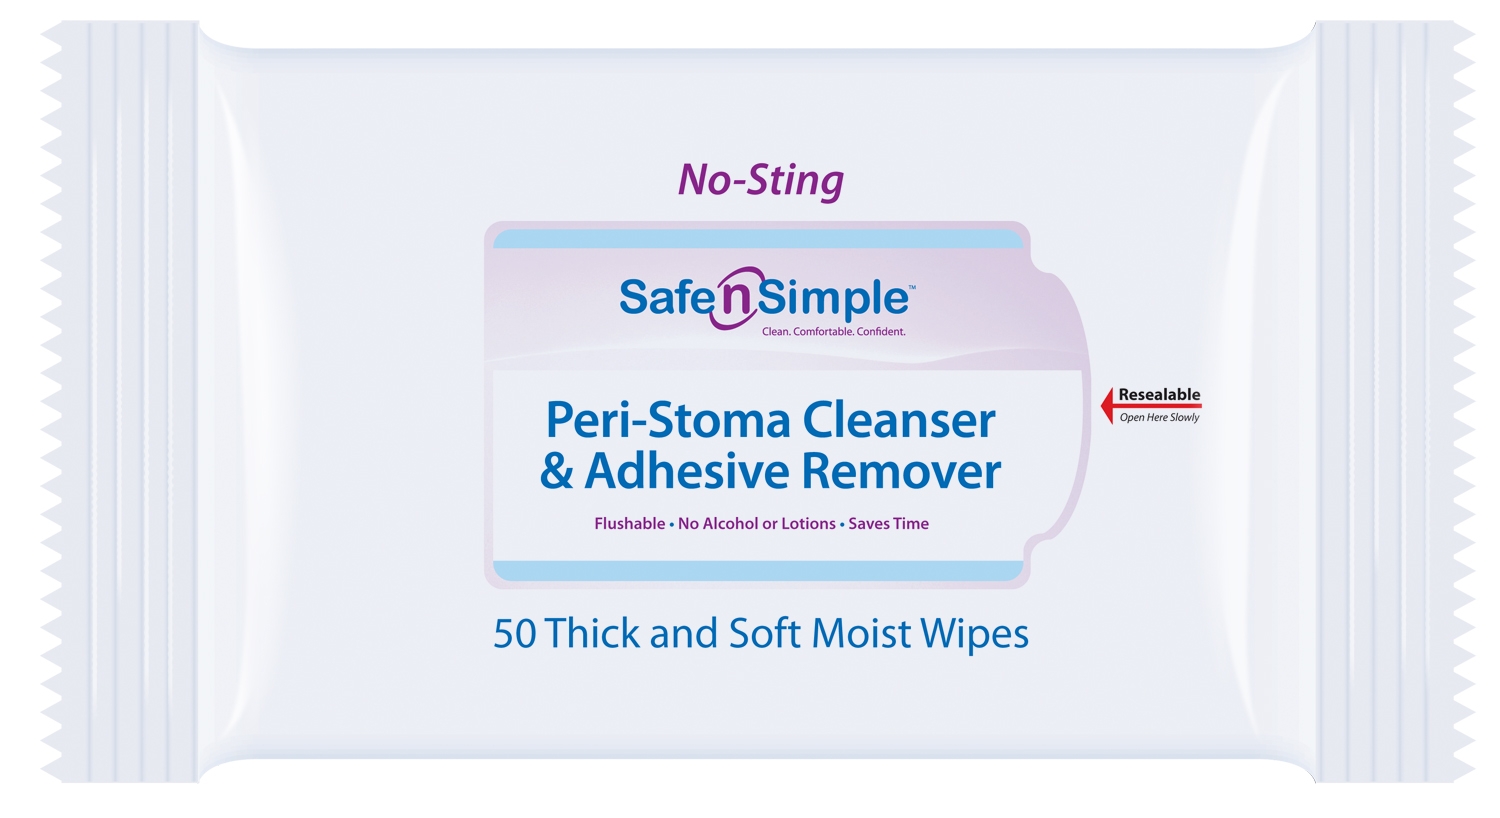 Safe n Simple No Sting Peri-Stoma Cleanser & Adhesive Remover Wipes